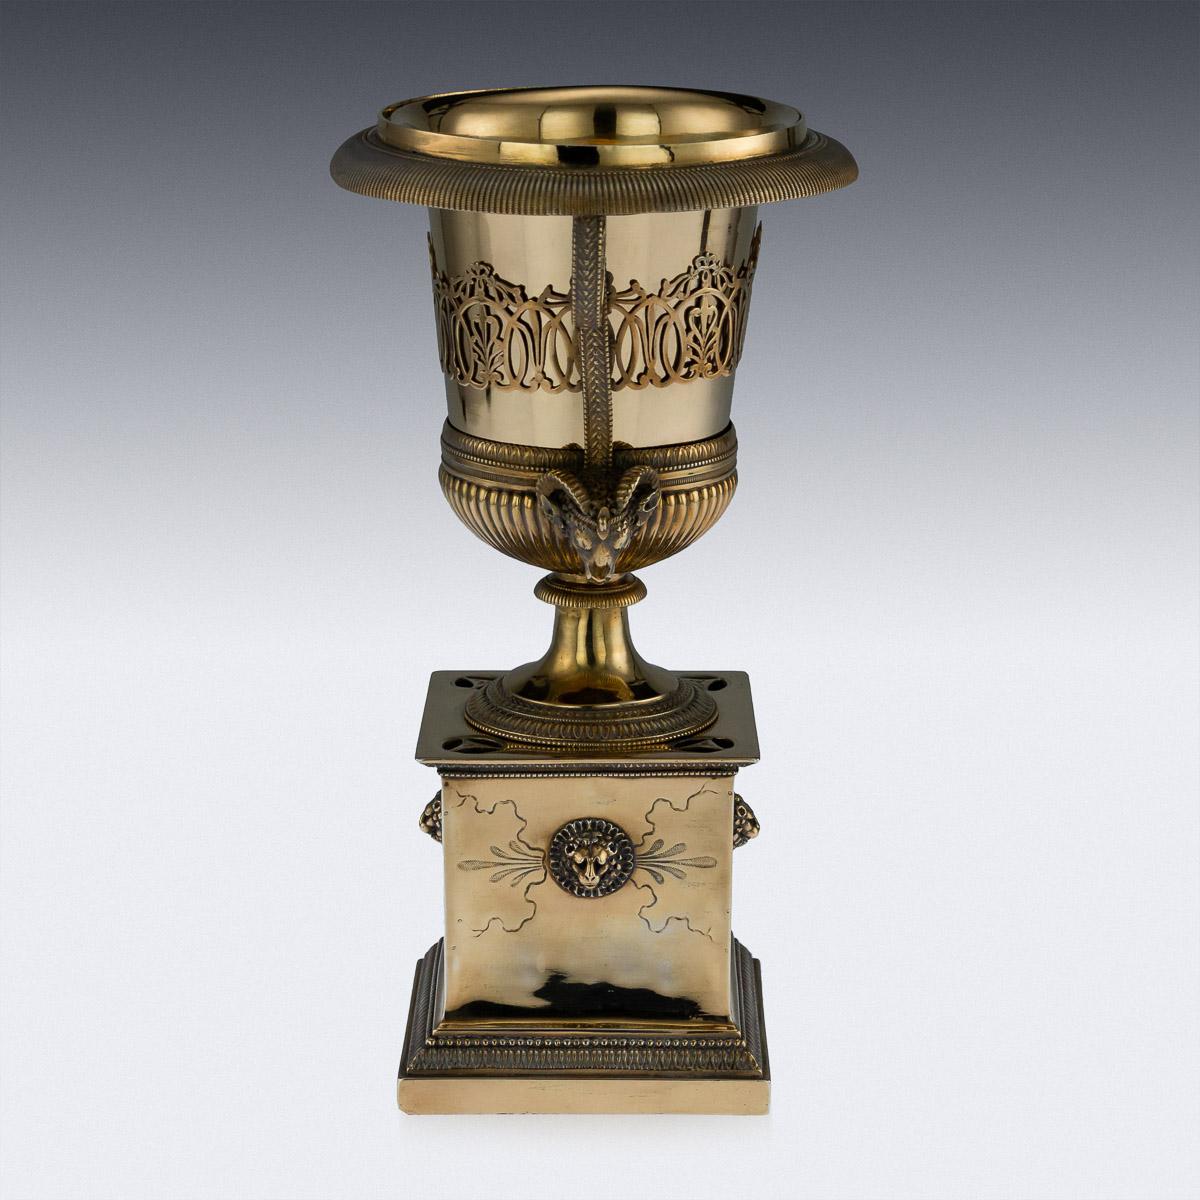 Antique early 19th century French Directoire style solid silver-gilt sugar urn, on a square podium base and fitted with a gilt-metal liner, urn applied with ram's head handles and decorated with scrolling foliage, lacking a cover. All parts